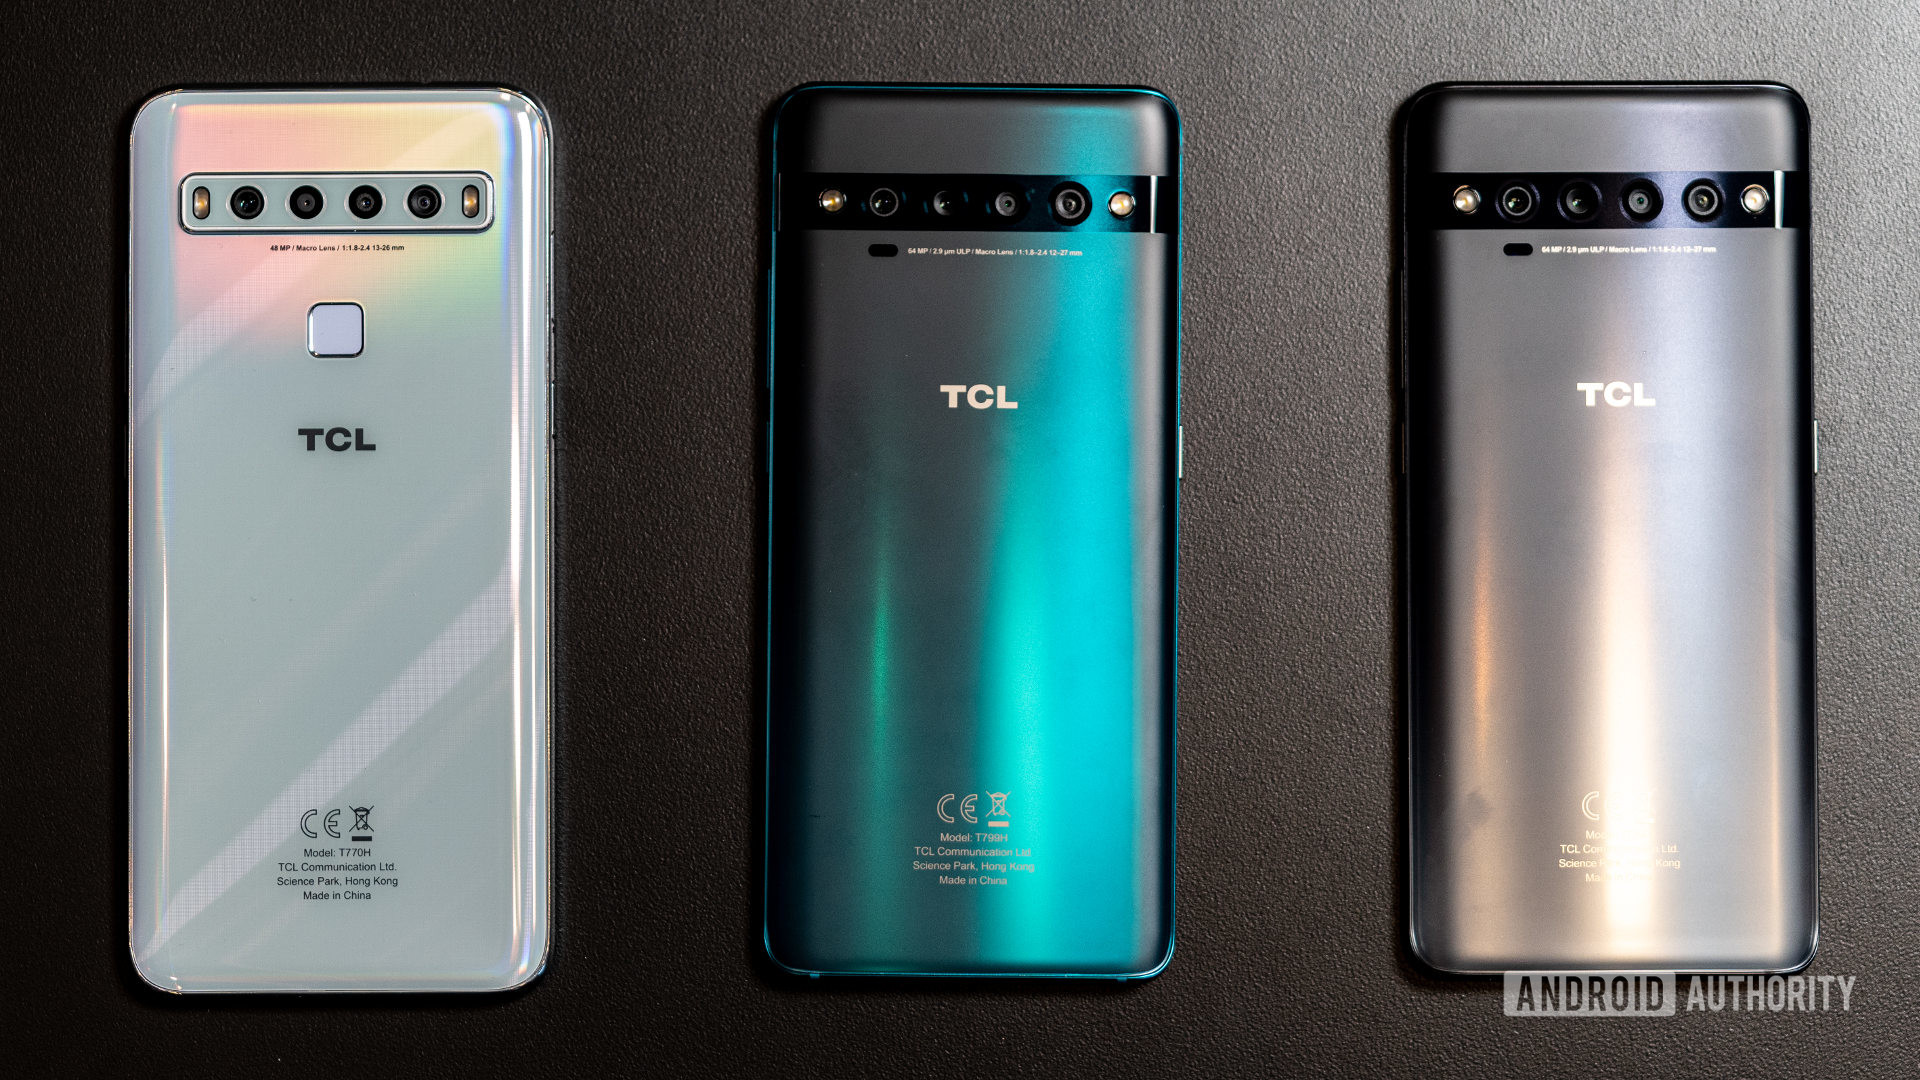 The TCL 10 series phones.